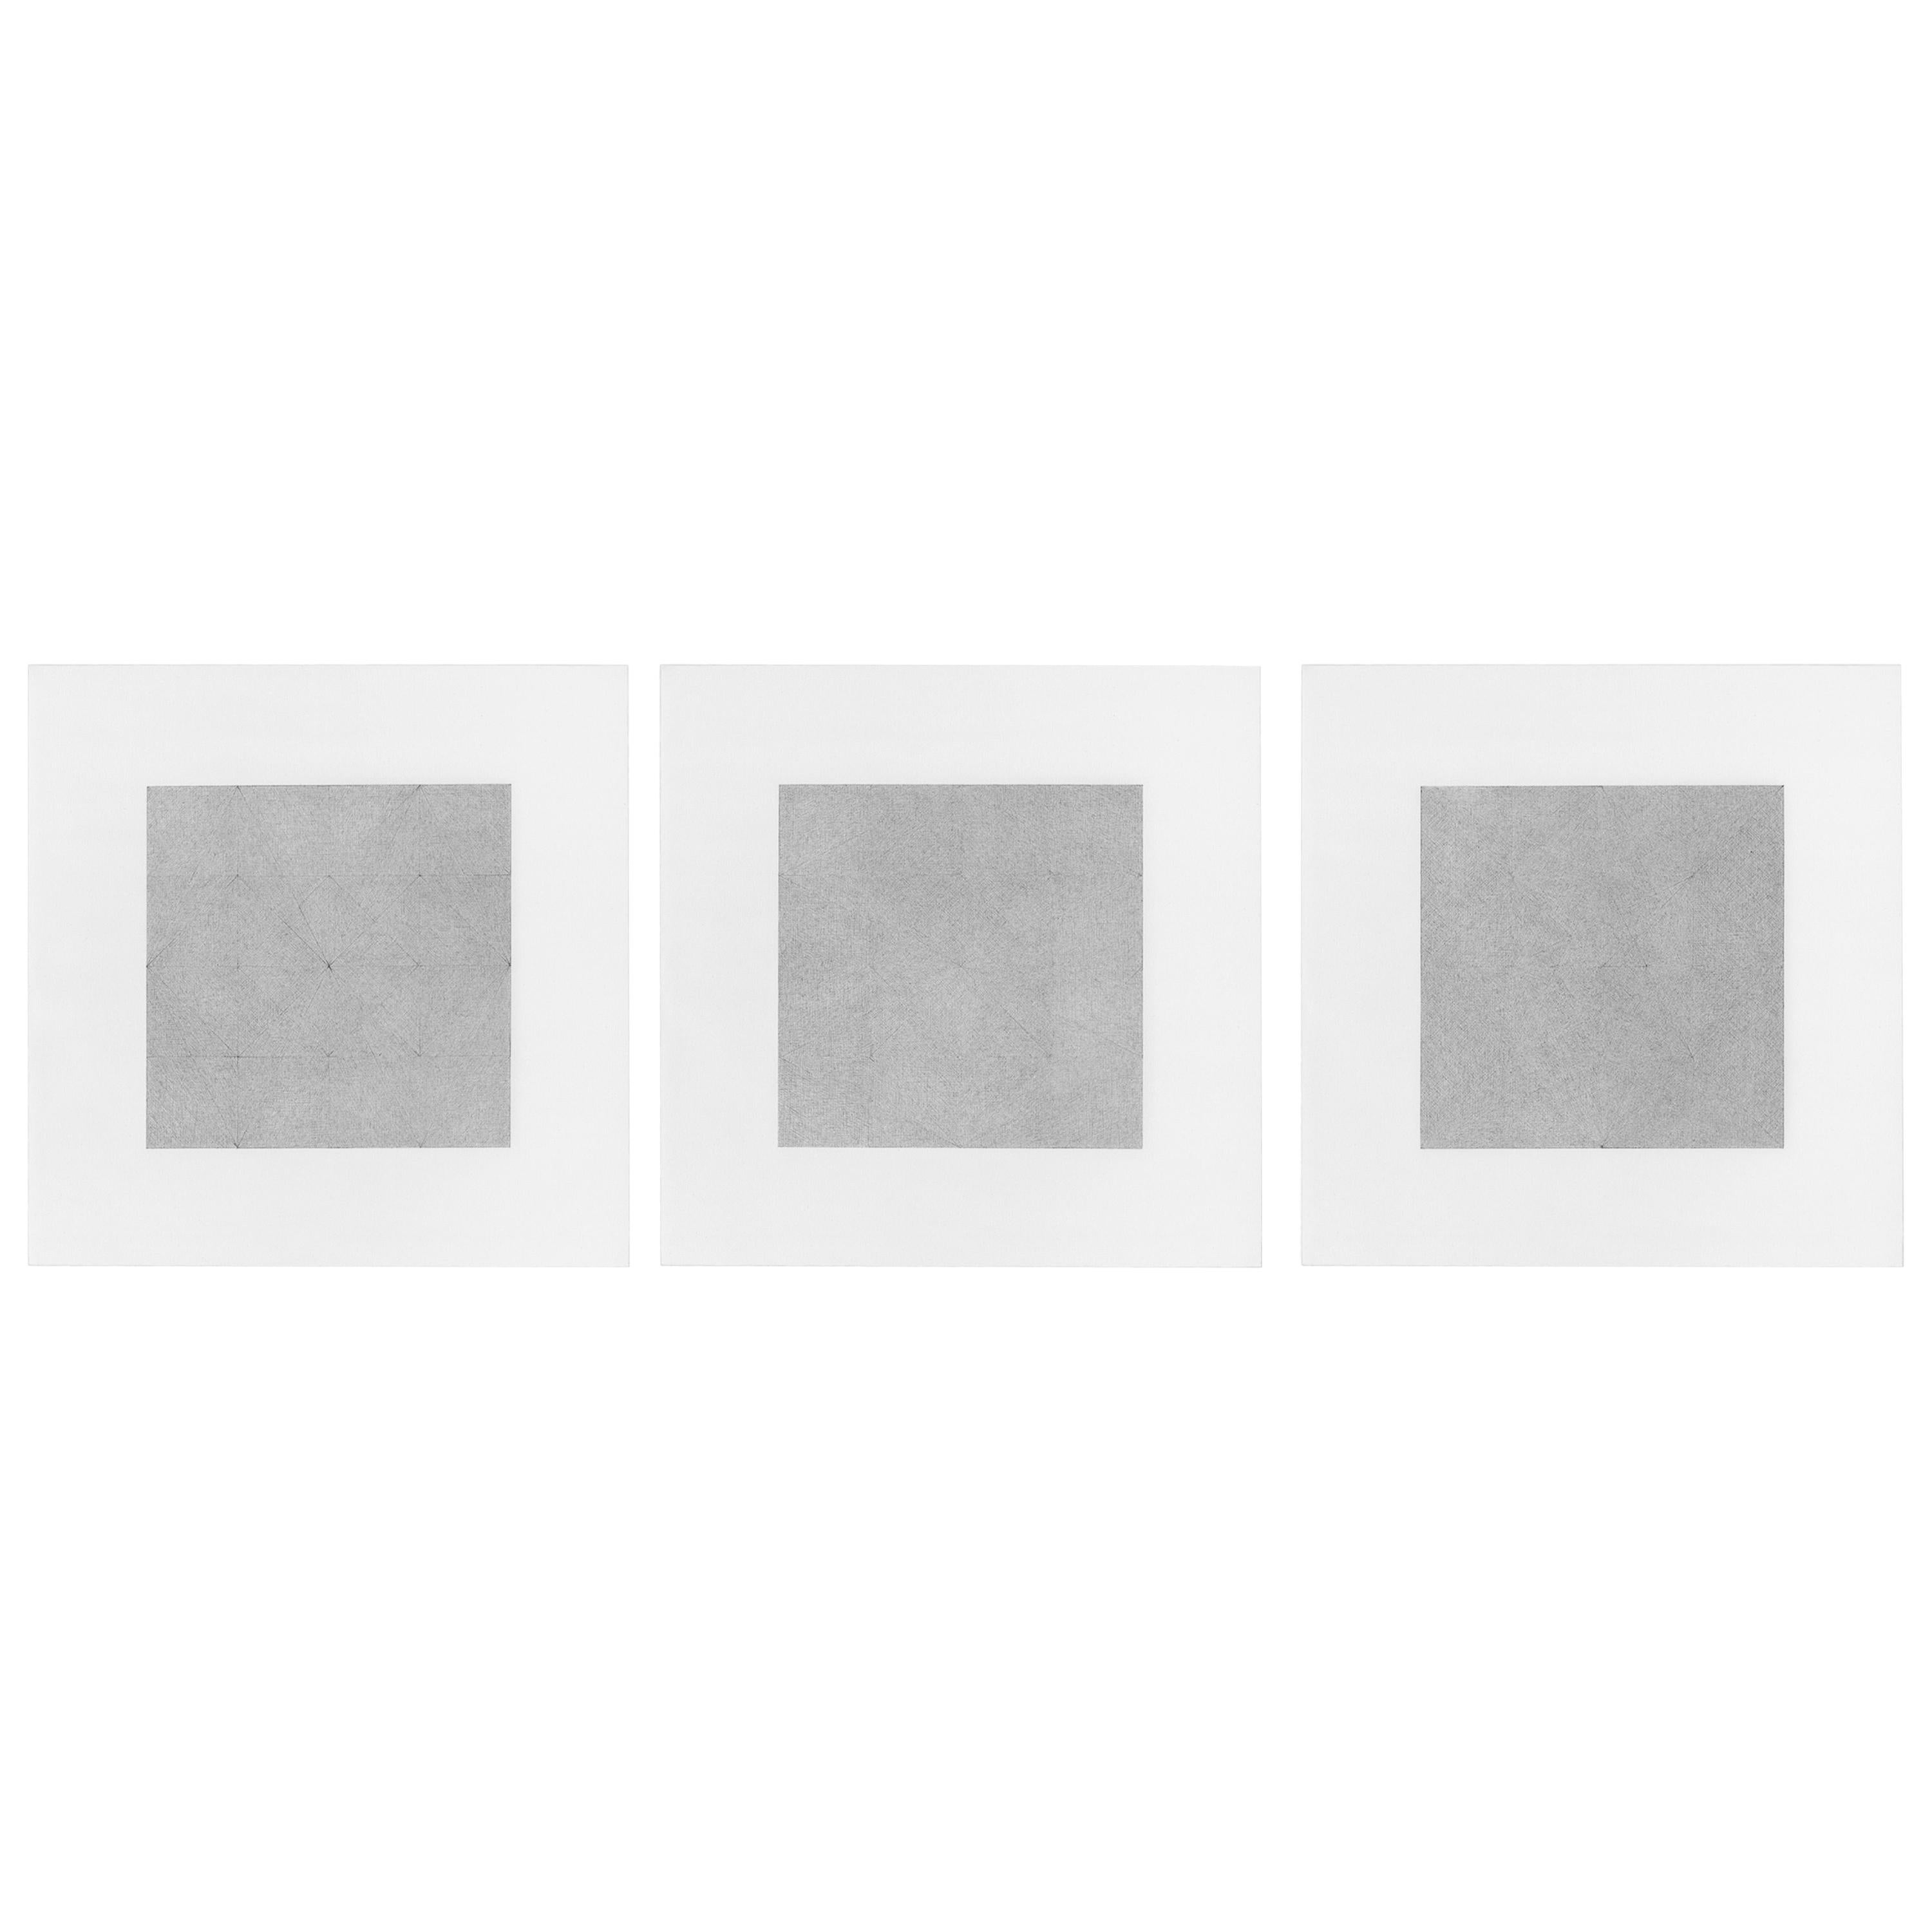 Patrick Carrara Garden of Silence Triptych, Graphite on Paper, 2009 For Sale